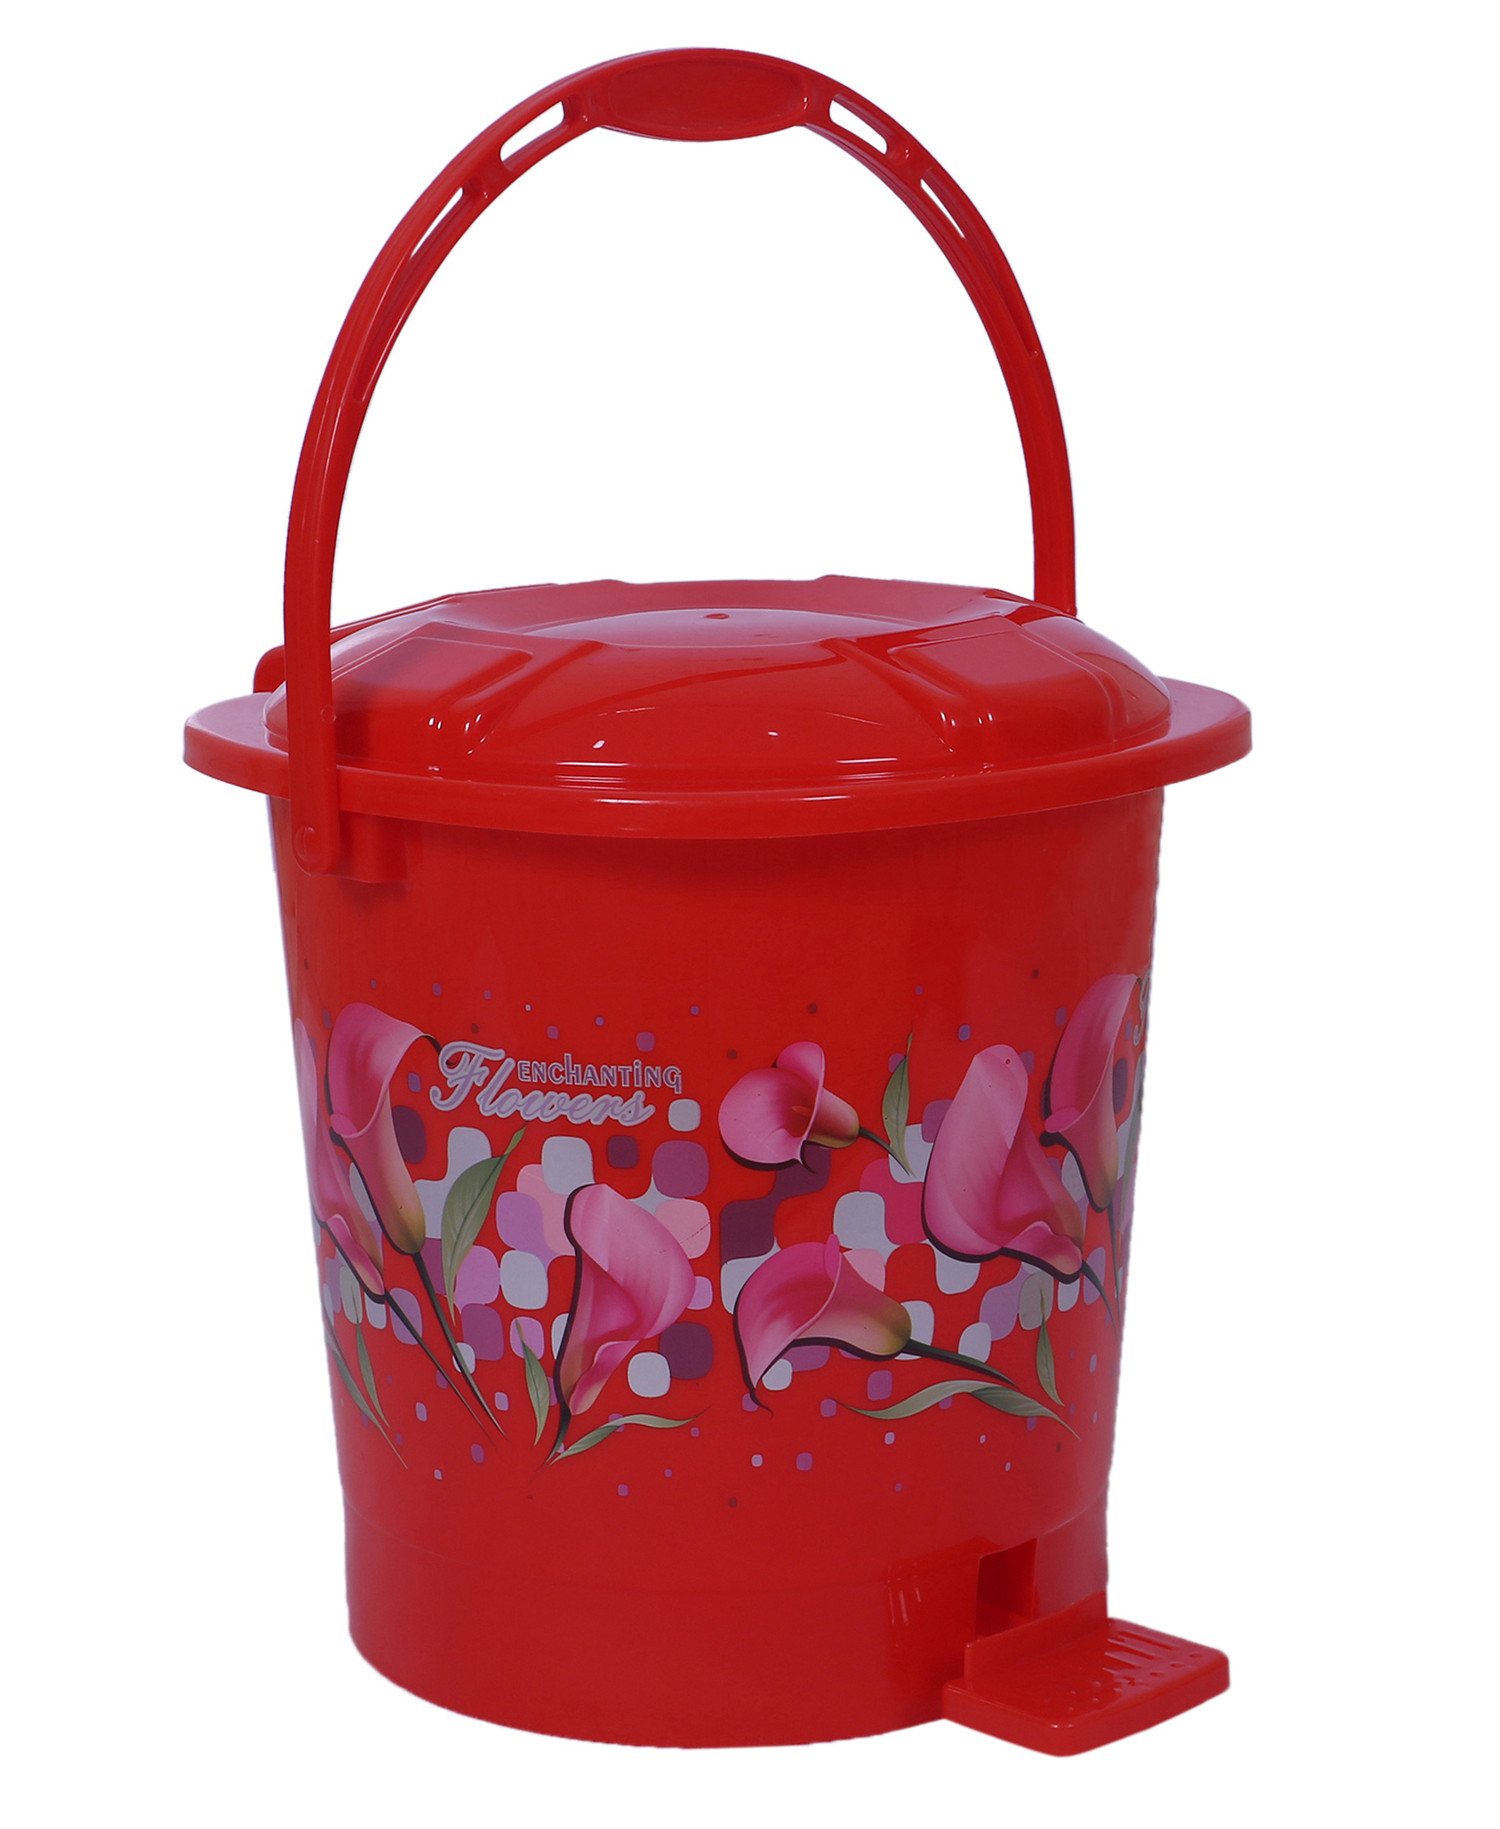 Kuber Industries Durable Floral Print Plastic Pedal Dustbin|Waste Bin|Trash Can For Kitchen & Home With Handle,10 Litre (Red)